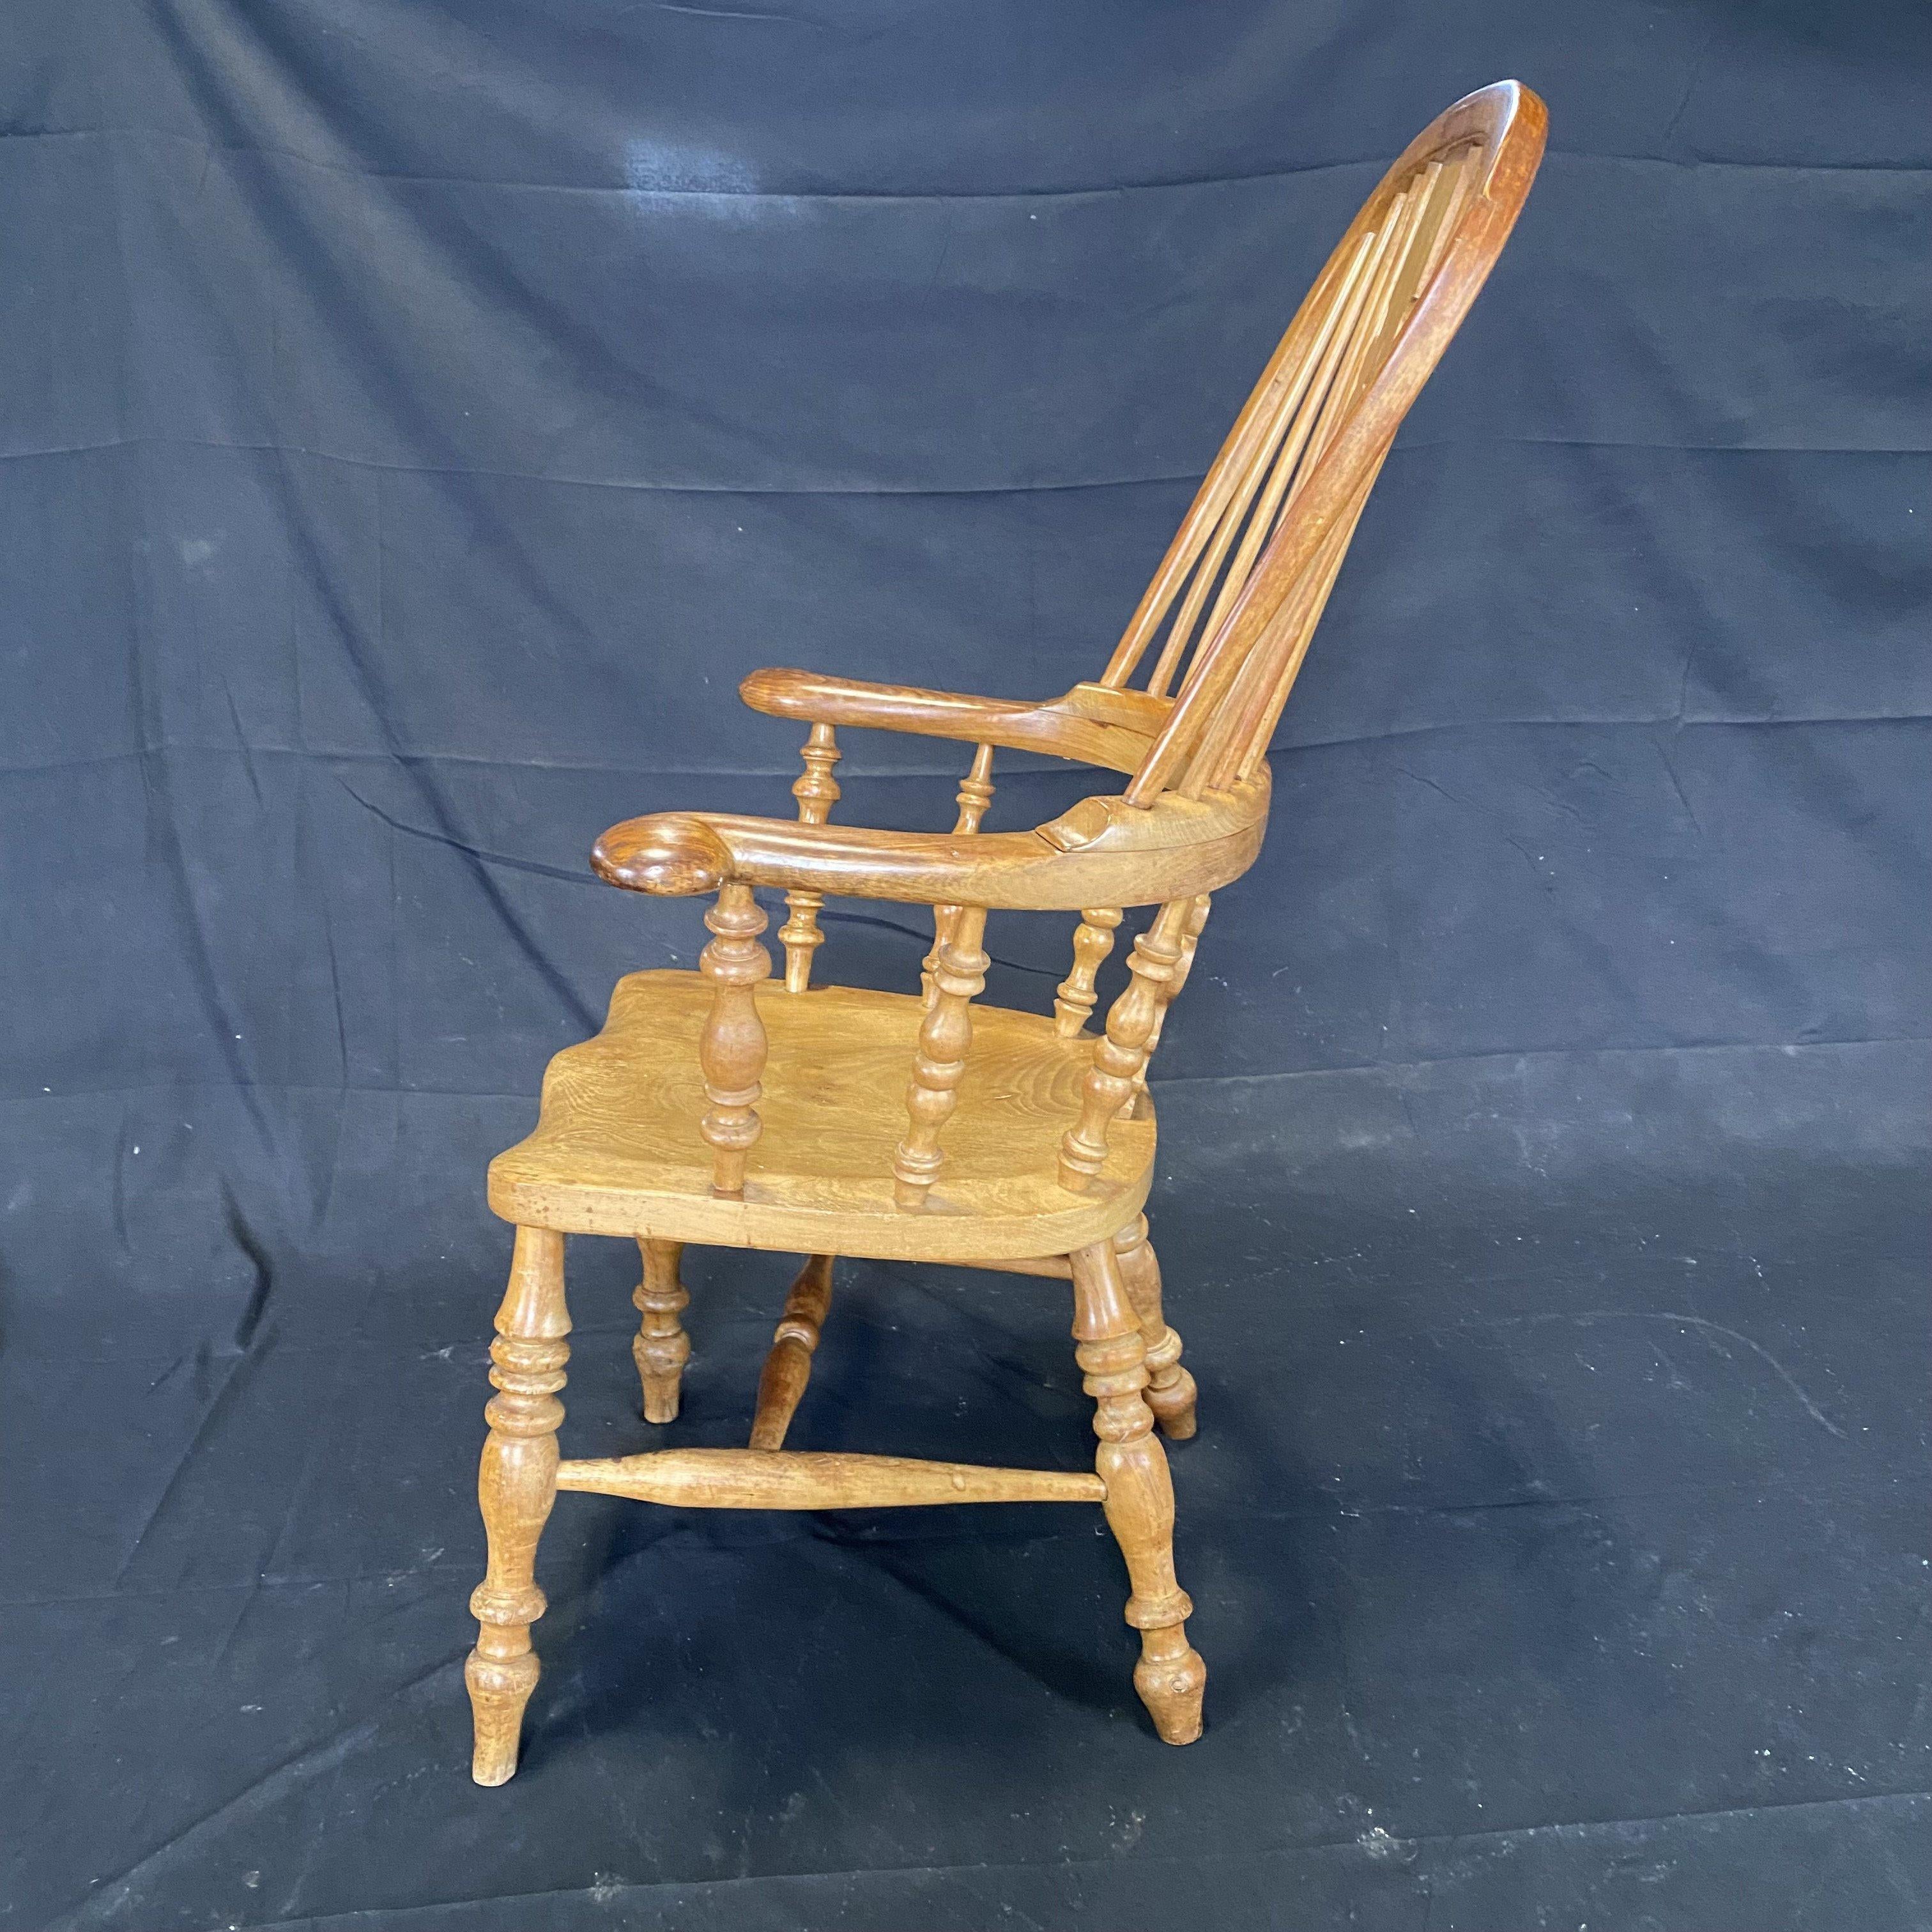 Early 20th century Windsor oak armchair with turned legs and stretcher, well figured and very comfortable. The Windsor chair is established as one of the great classics of English country furniture. Made by village craftsmen to traditional designs